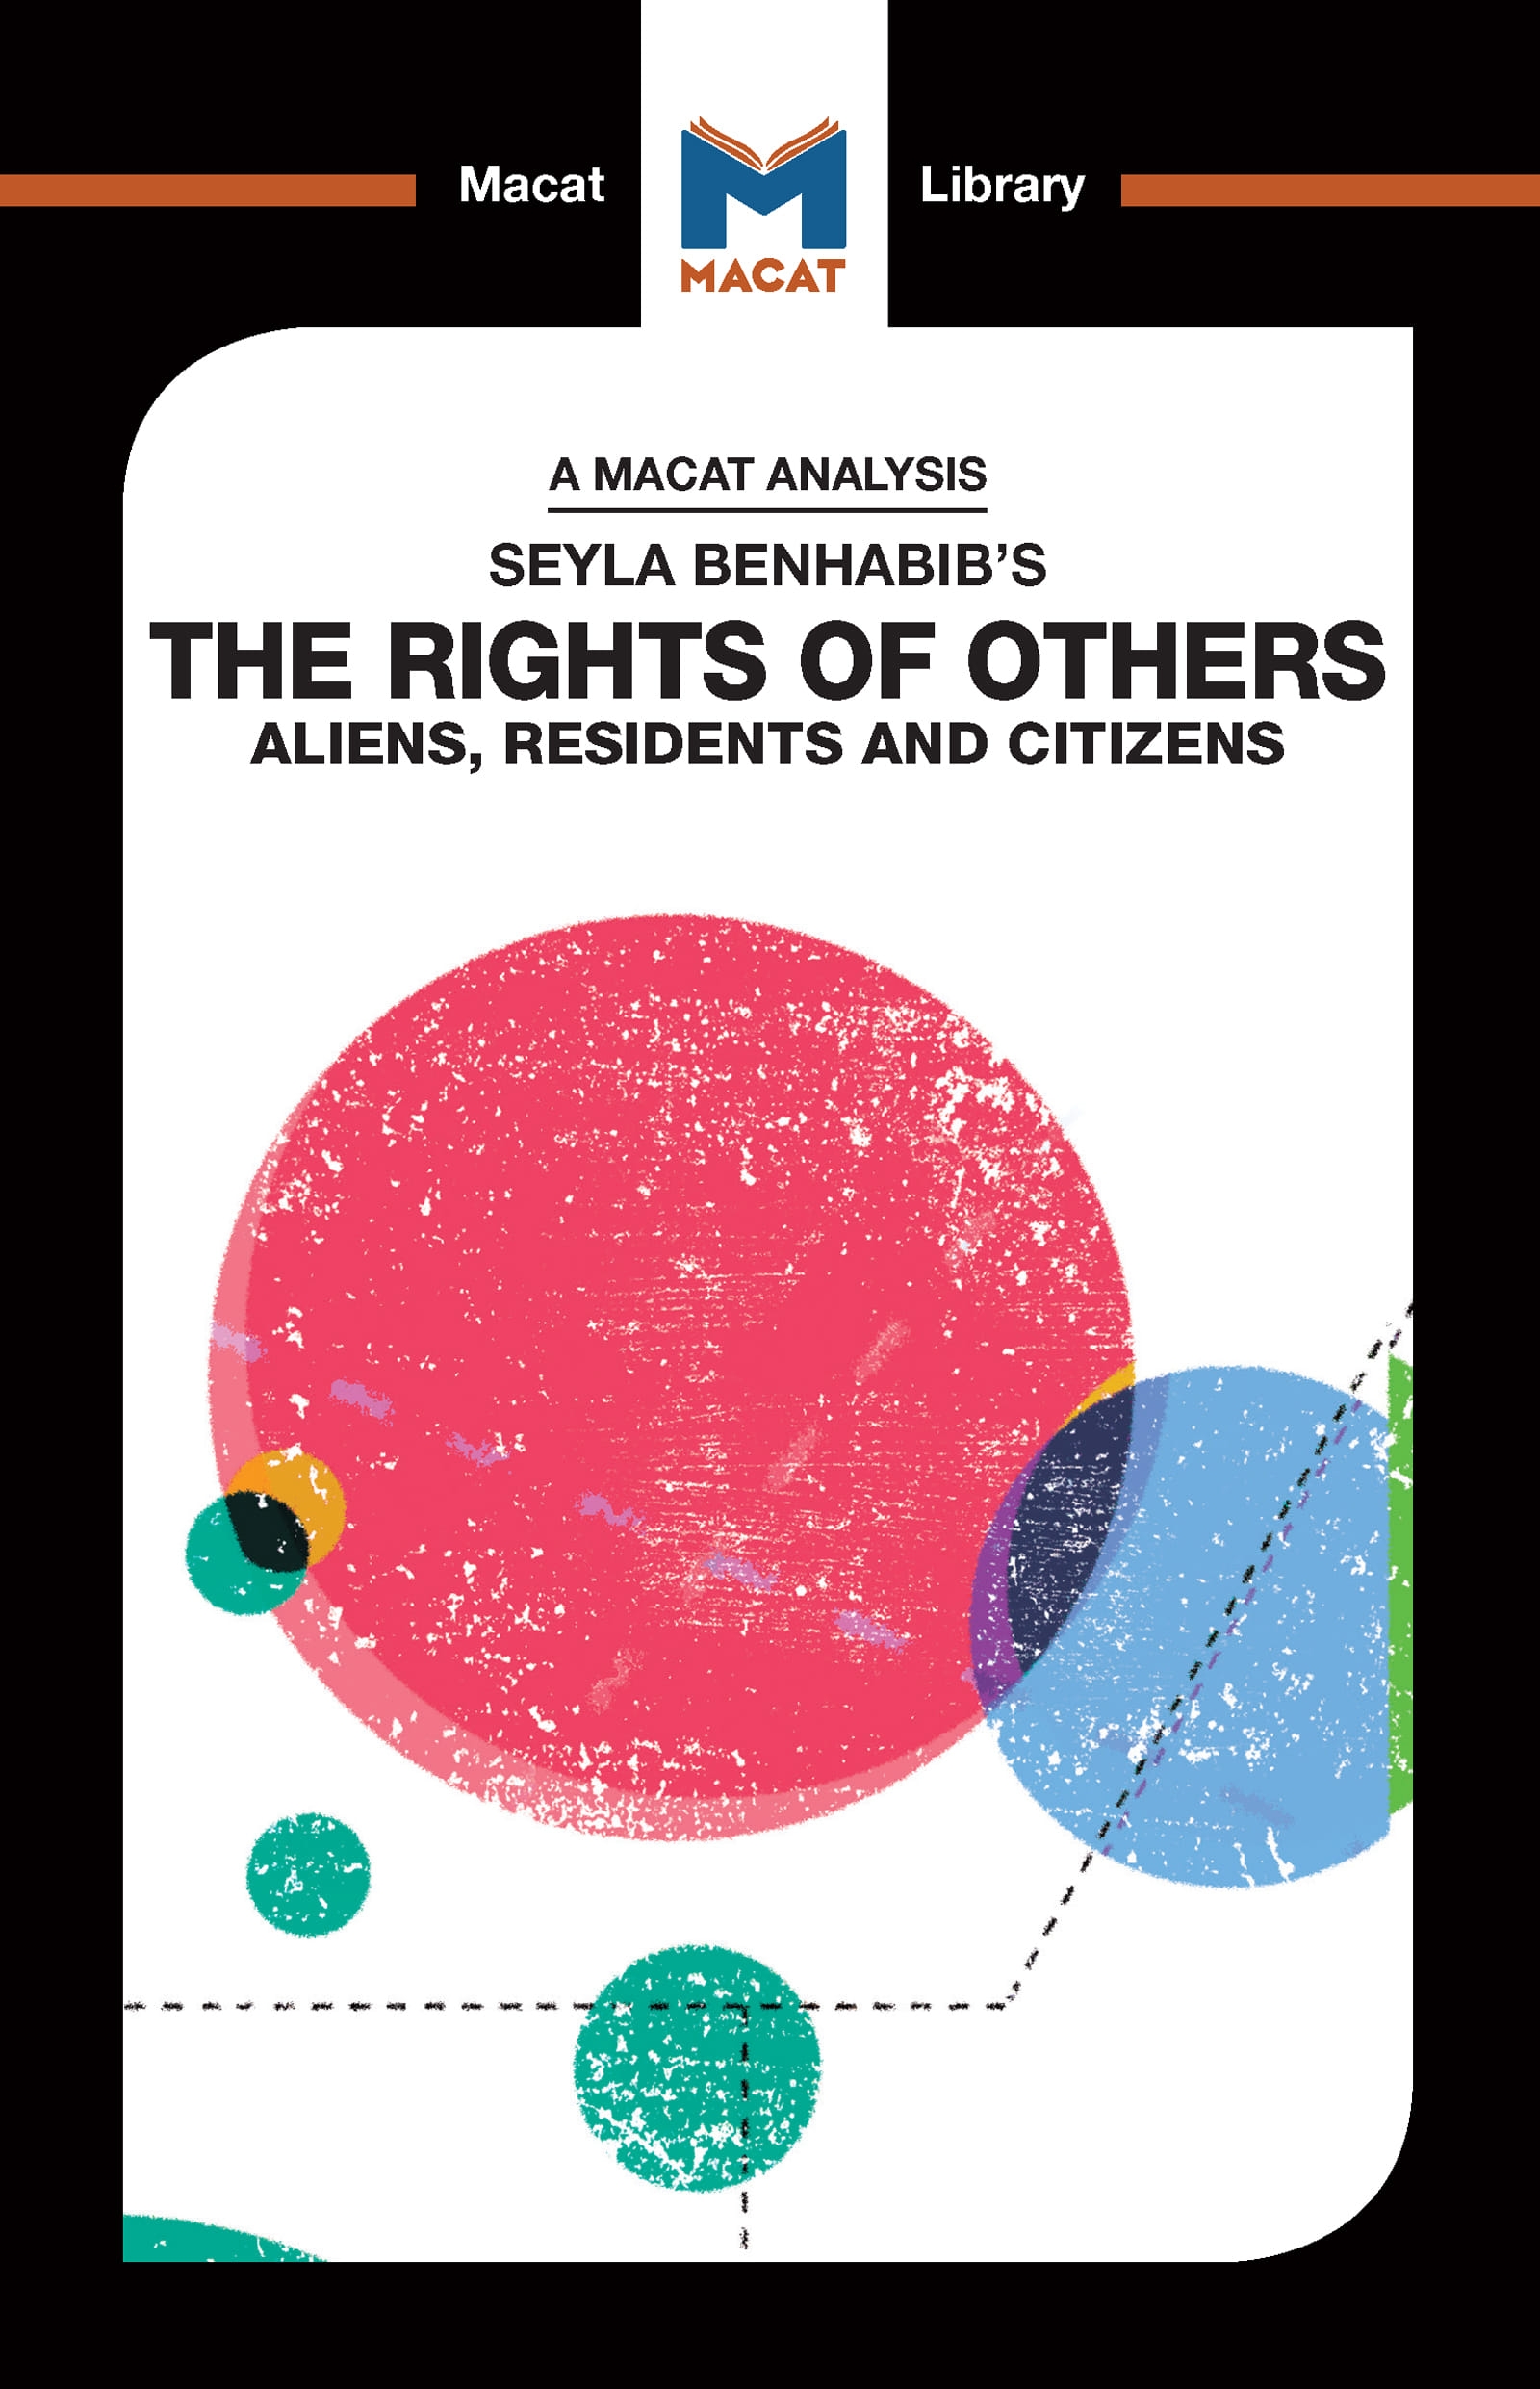 A Macat Analysis of Seyla Benhabib’s The Rights of Others: Aliens, Residents, and Citizens